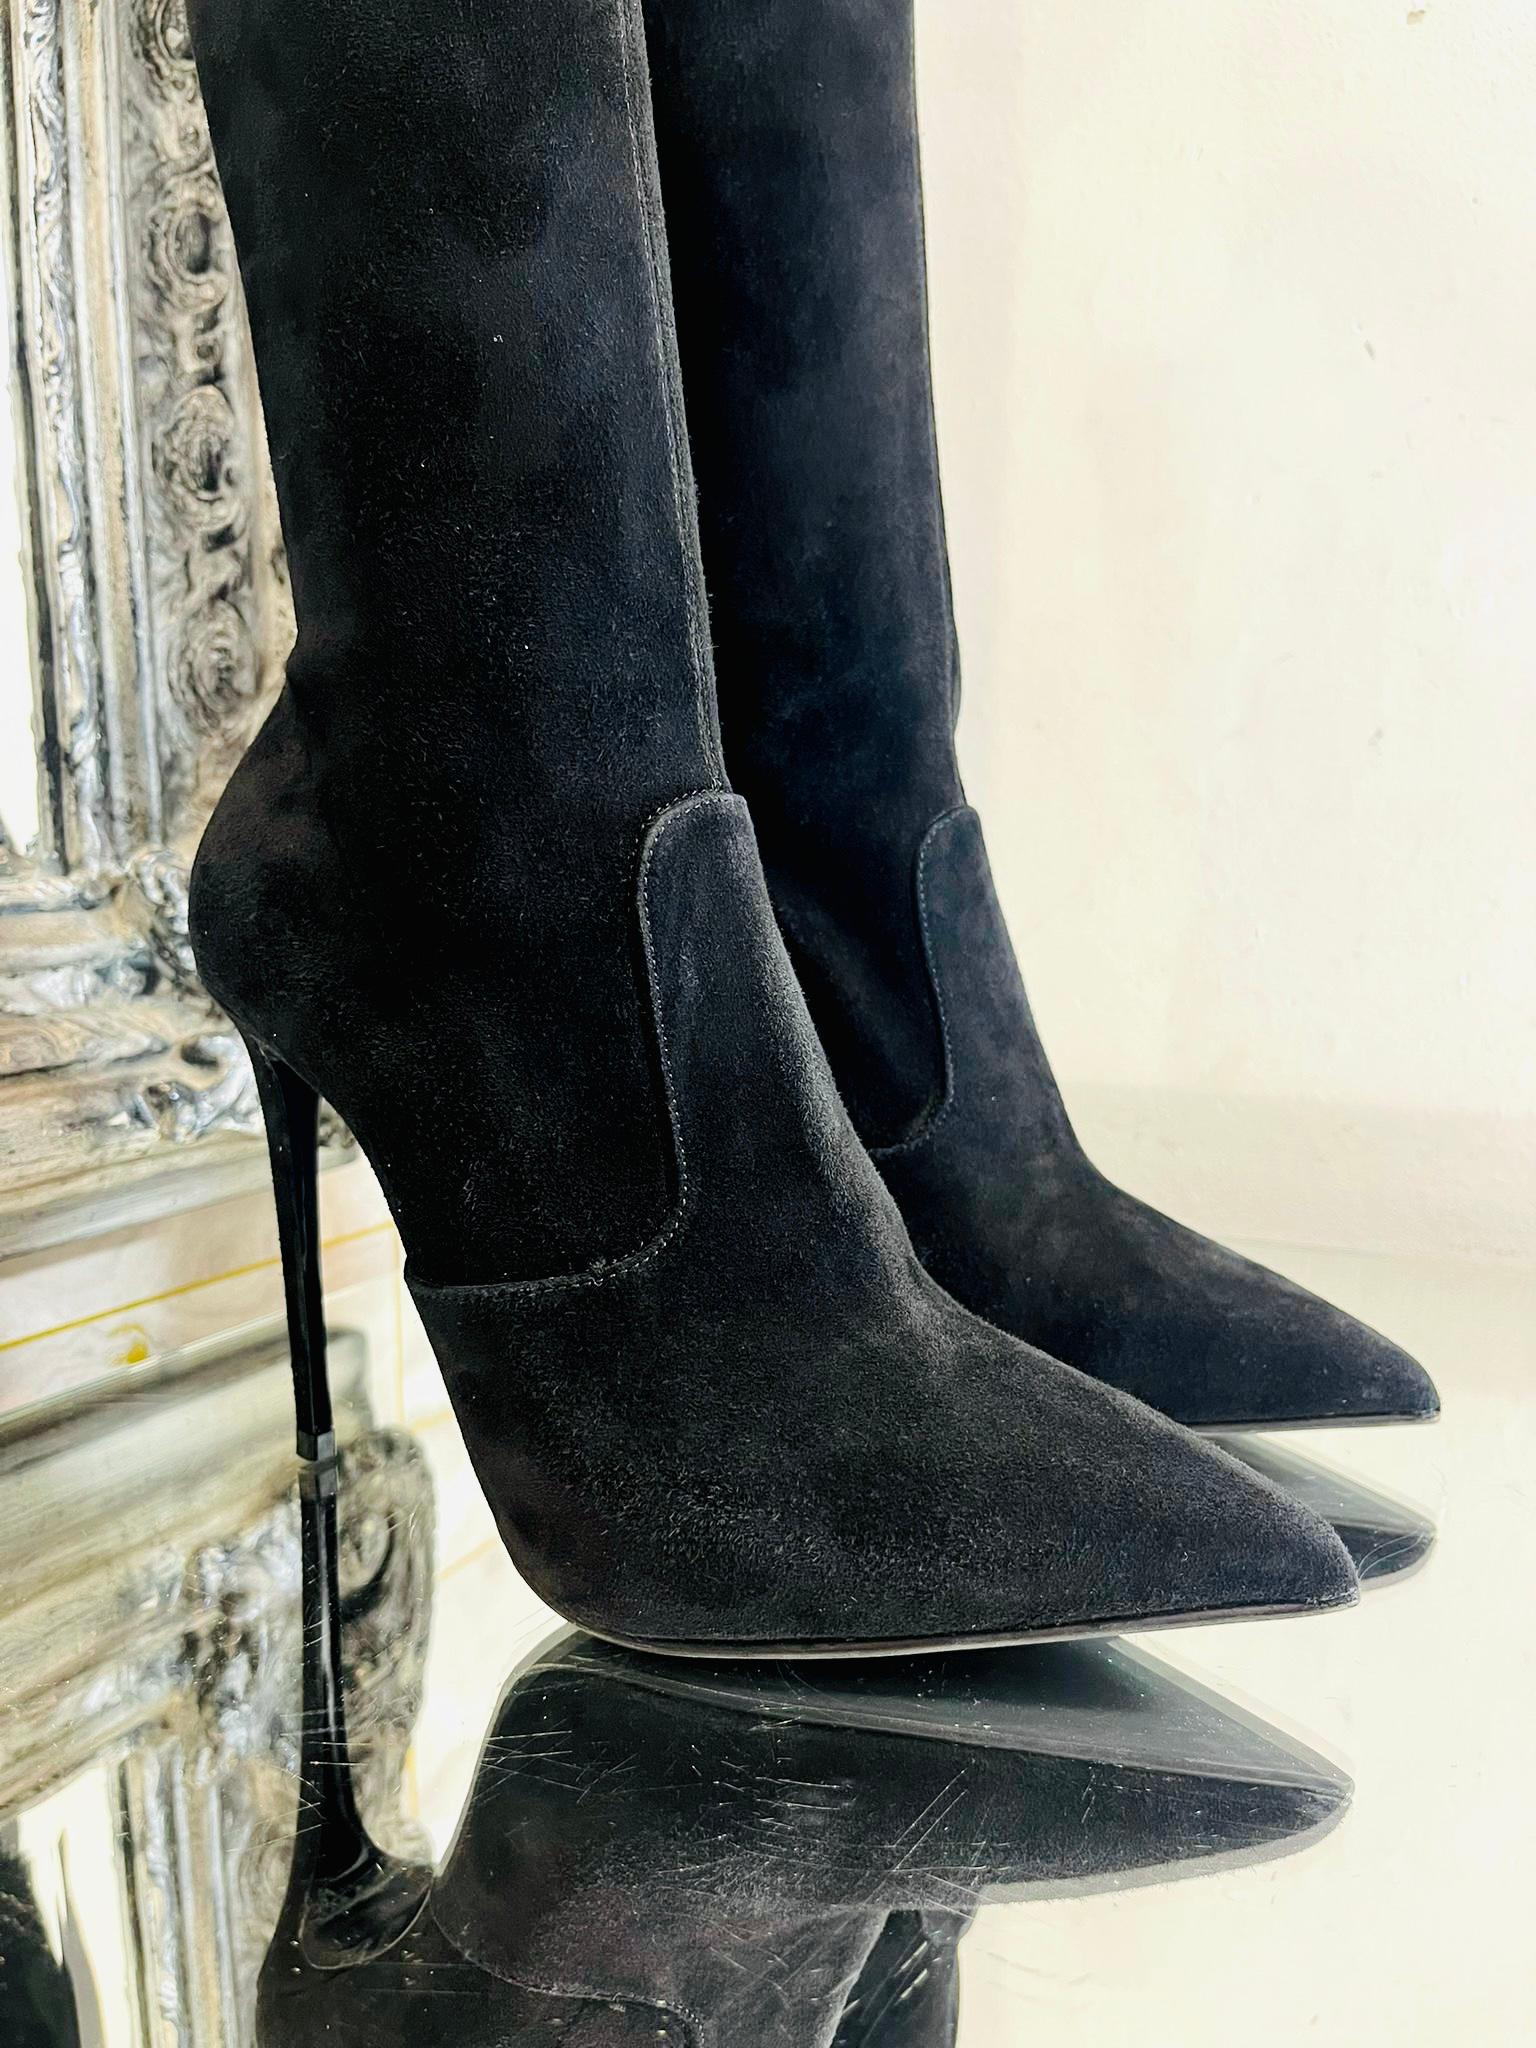 Le Silla Thigh-High Suede Boots For Sale 3